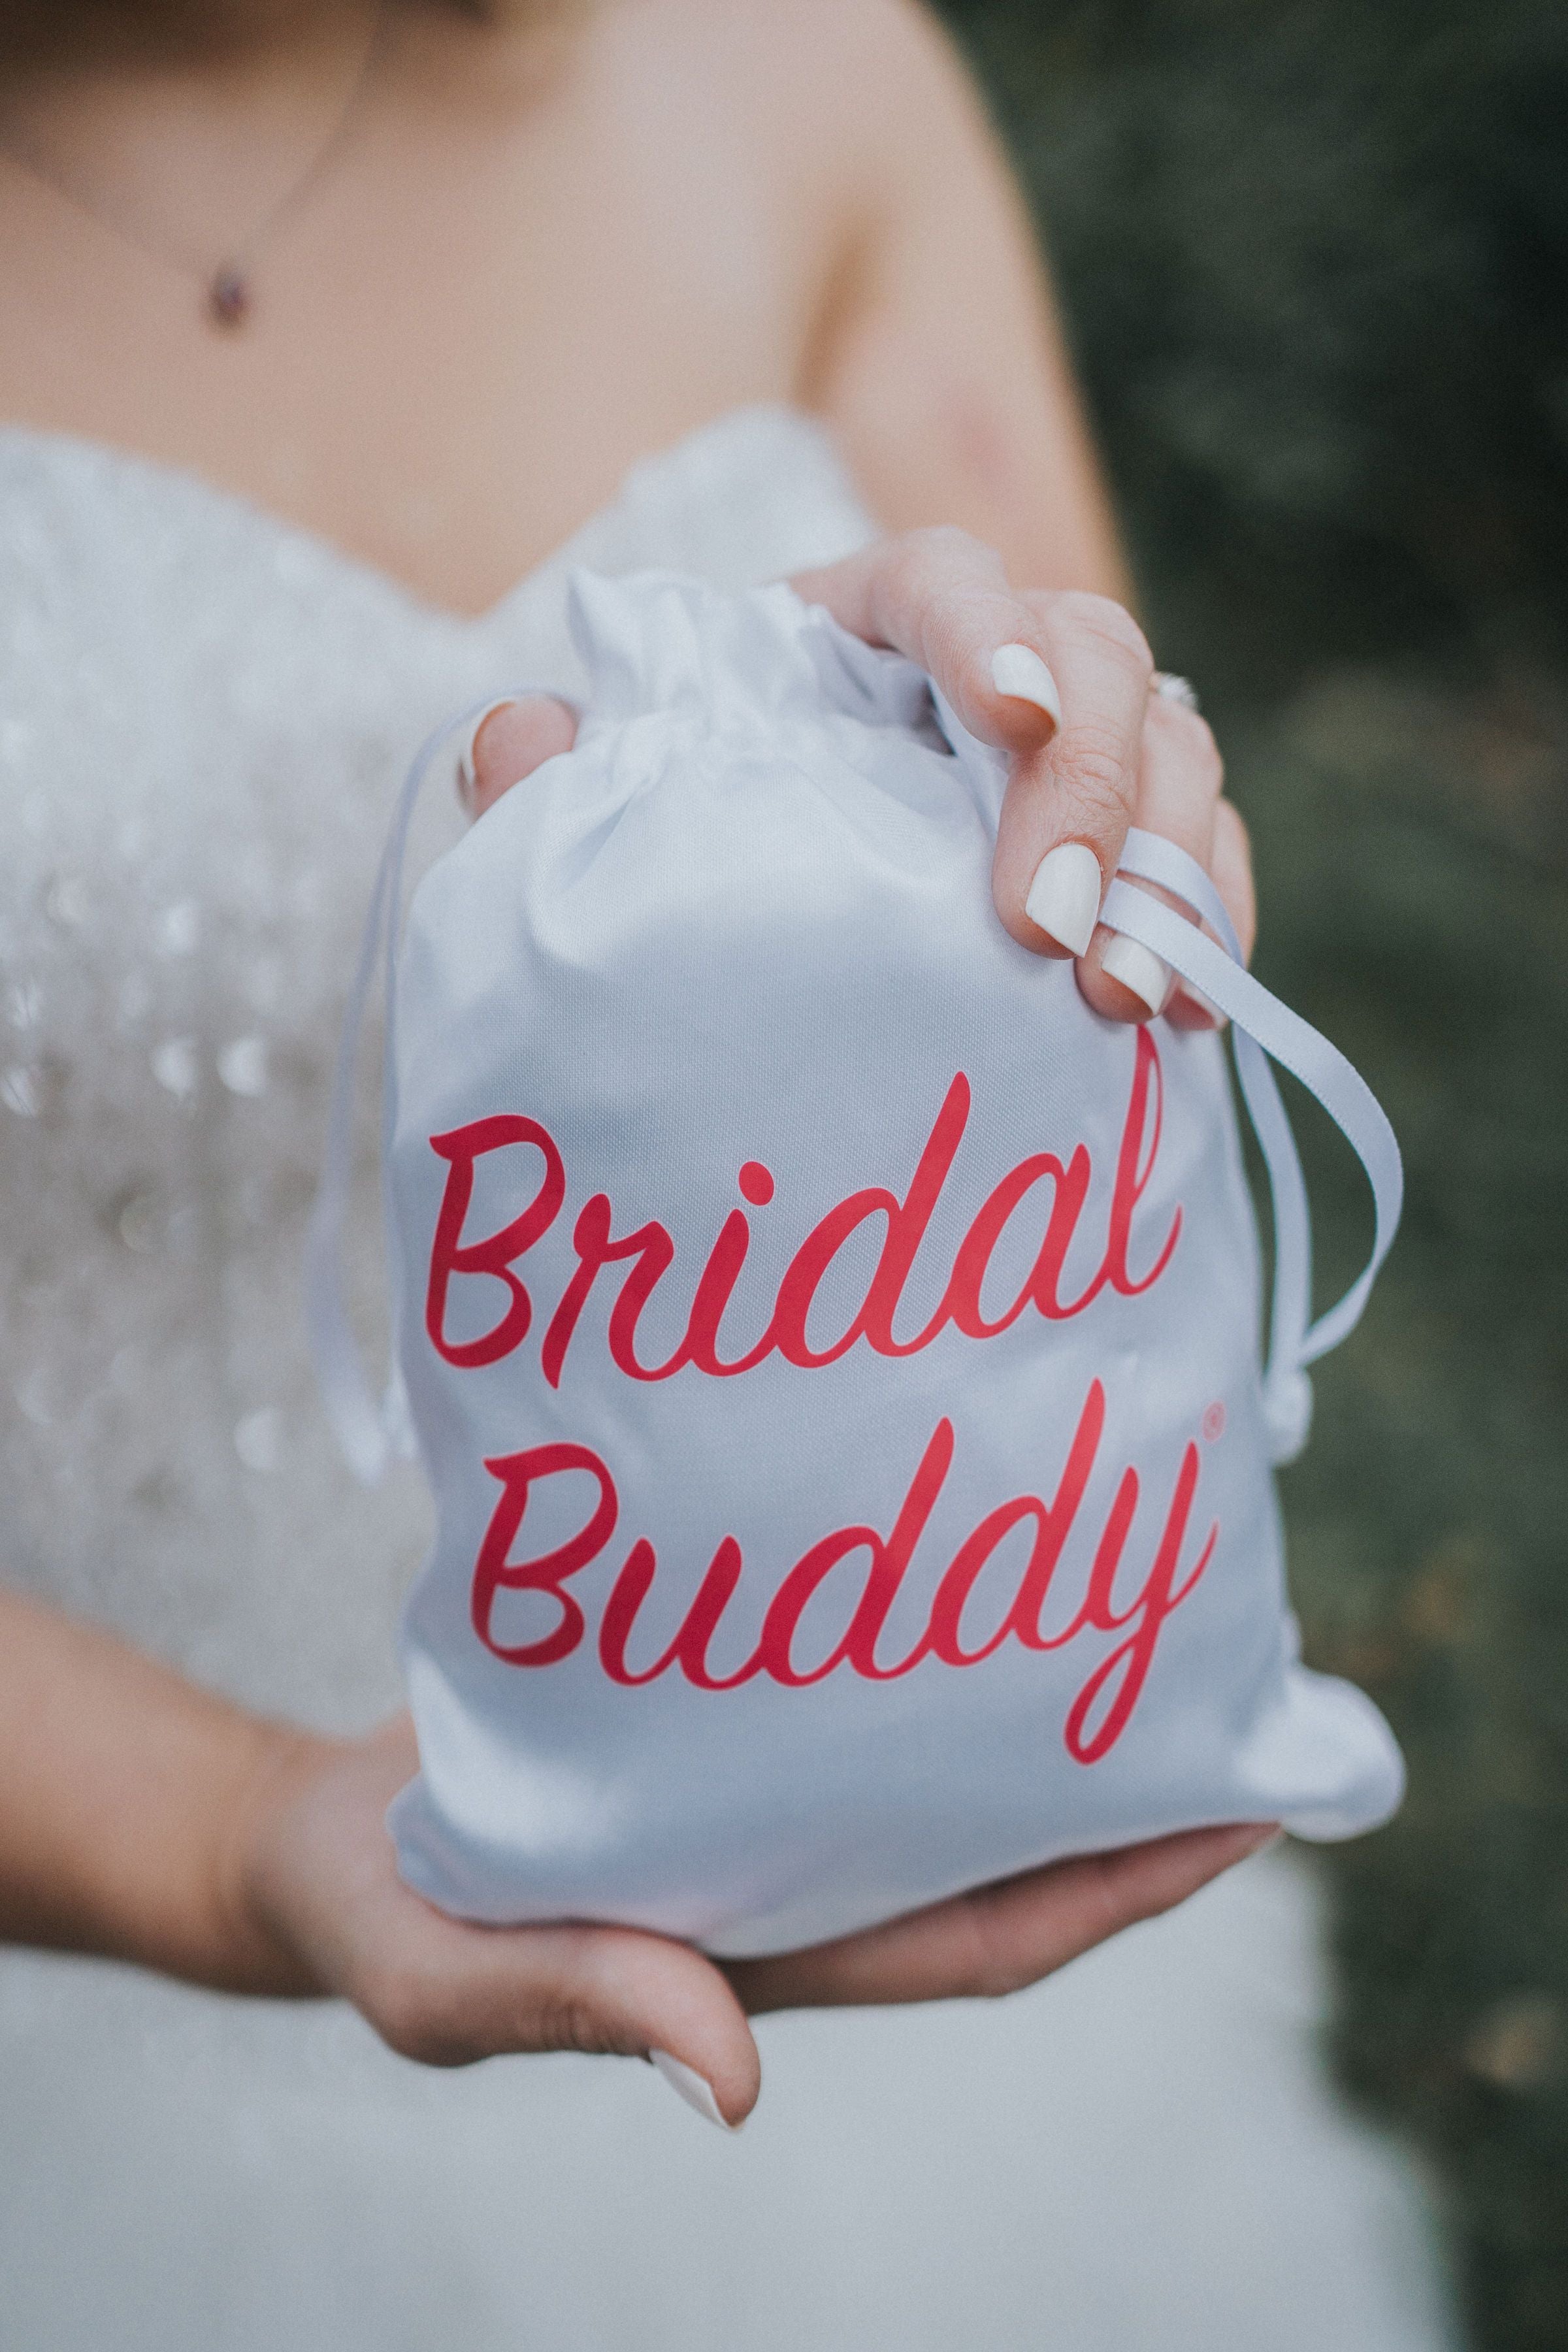 Bridal Buddy As Seen on Shark Tank, The lightweight slip that helps bag up  your dress so you can use the bathroom in peace on your big day! No  bridesmaids required!